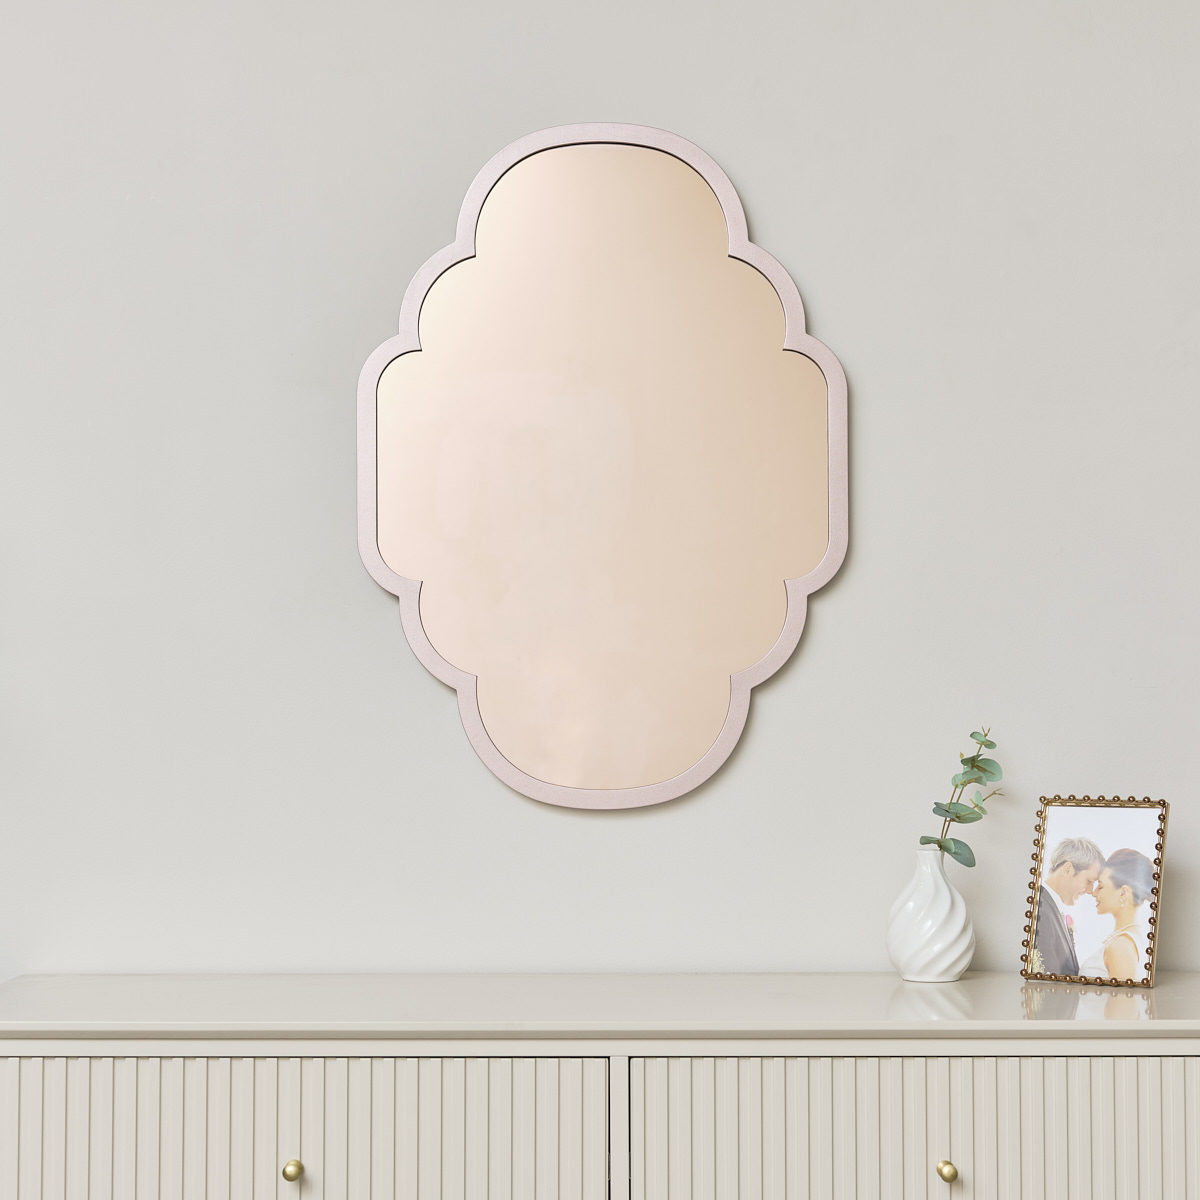 Rose Gold Curved Scalloped Framed Wall Mirror 70cm x 50cm